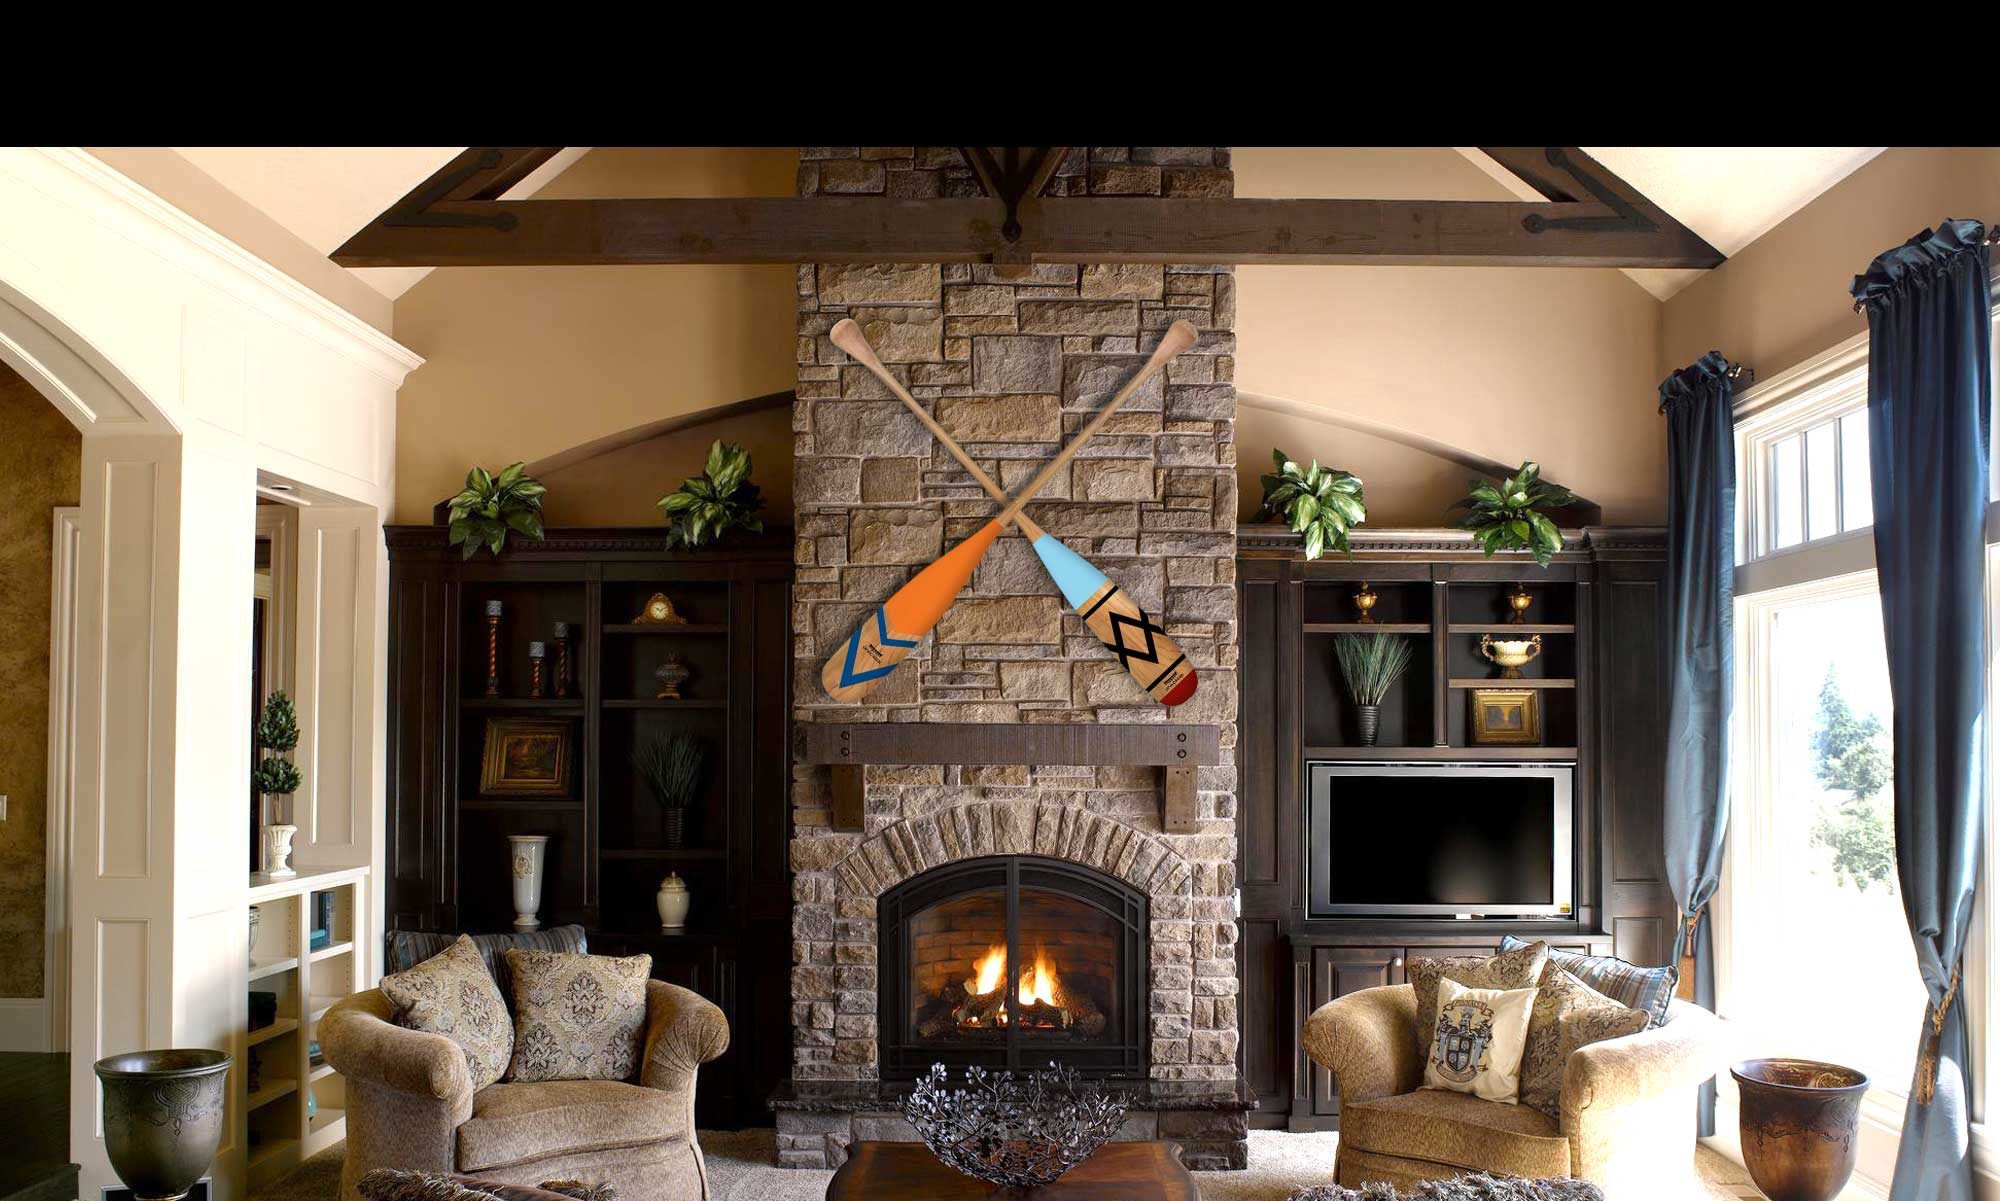 Fireplace with paddles